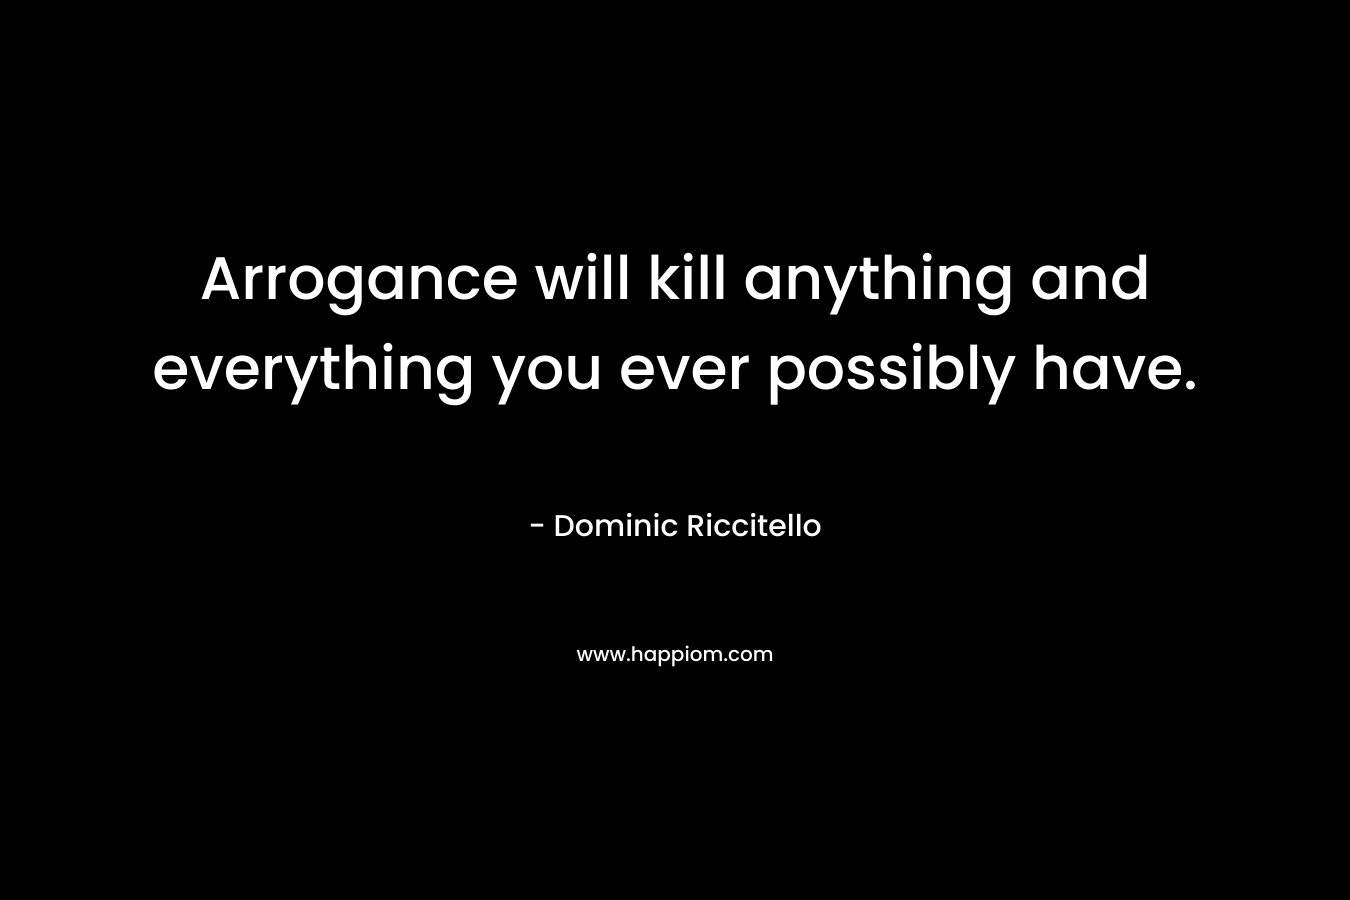 Arrogance will kill anything and everything you ever possibly have.